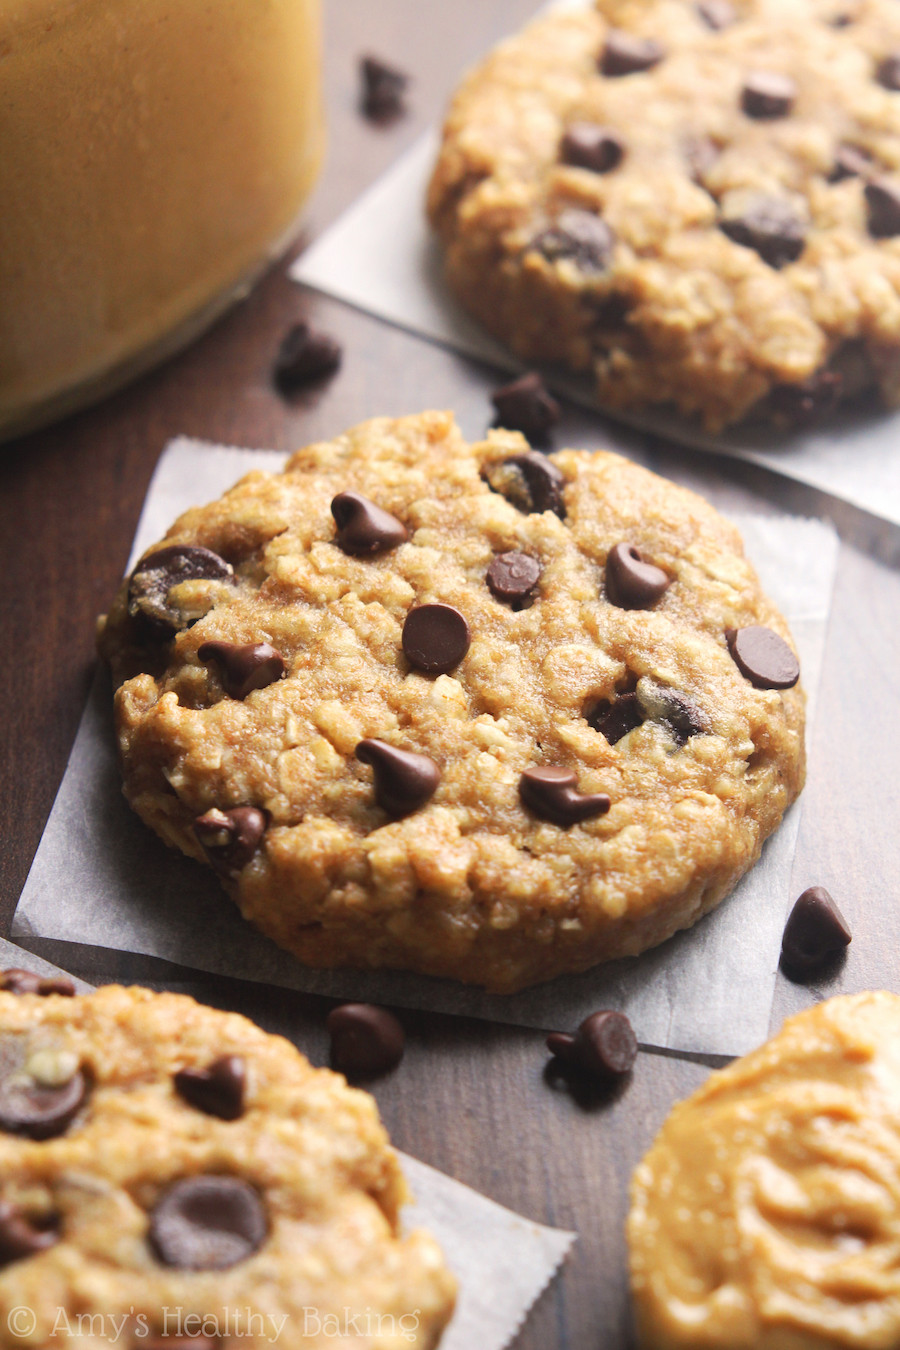 Healthy Oatmeal Cookies Recipe
 Chocolate Chip Peanut Butter Oatmeal Cookies Recipe Video